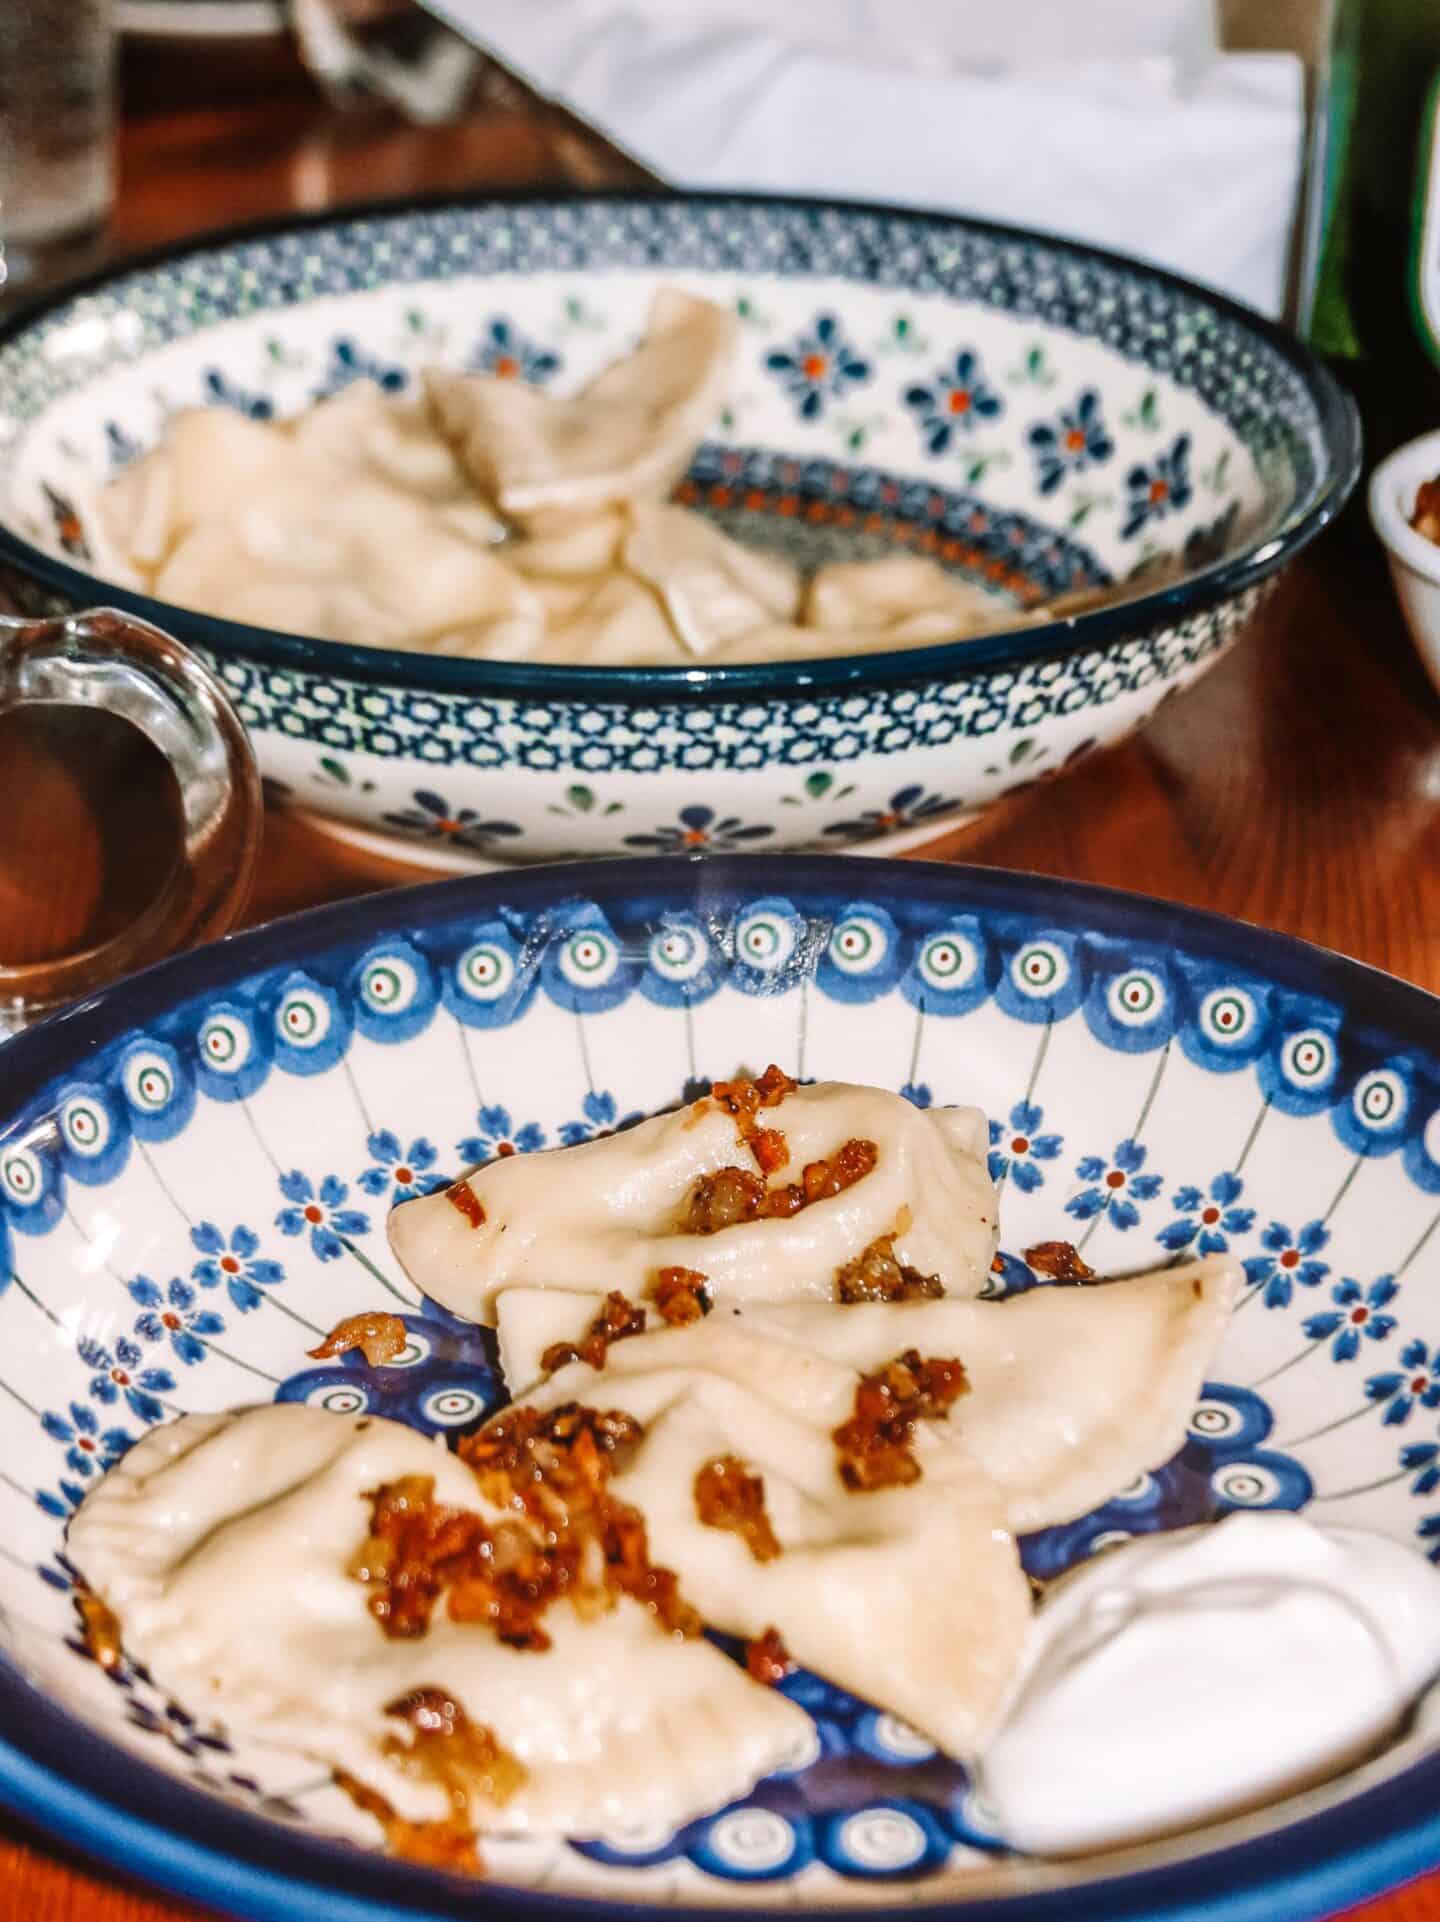 Pierogis are the best Krakow traditional food – I made these in a pierogi-making class